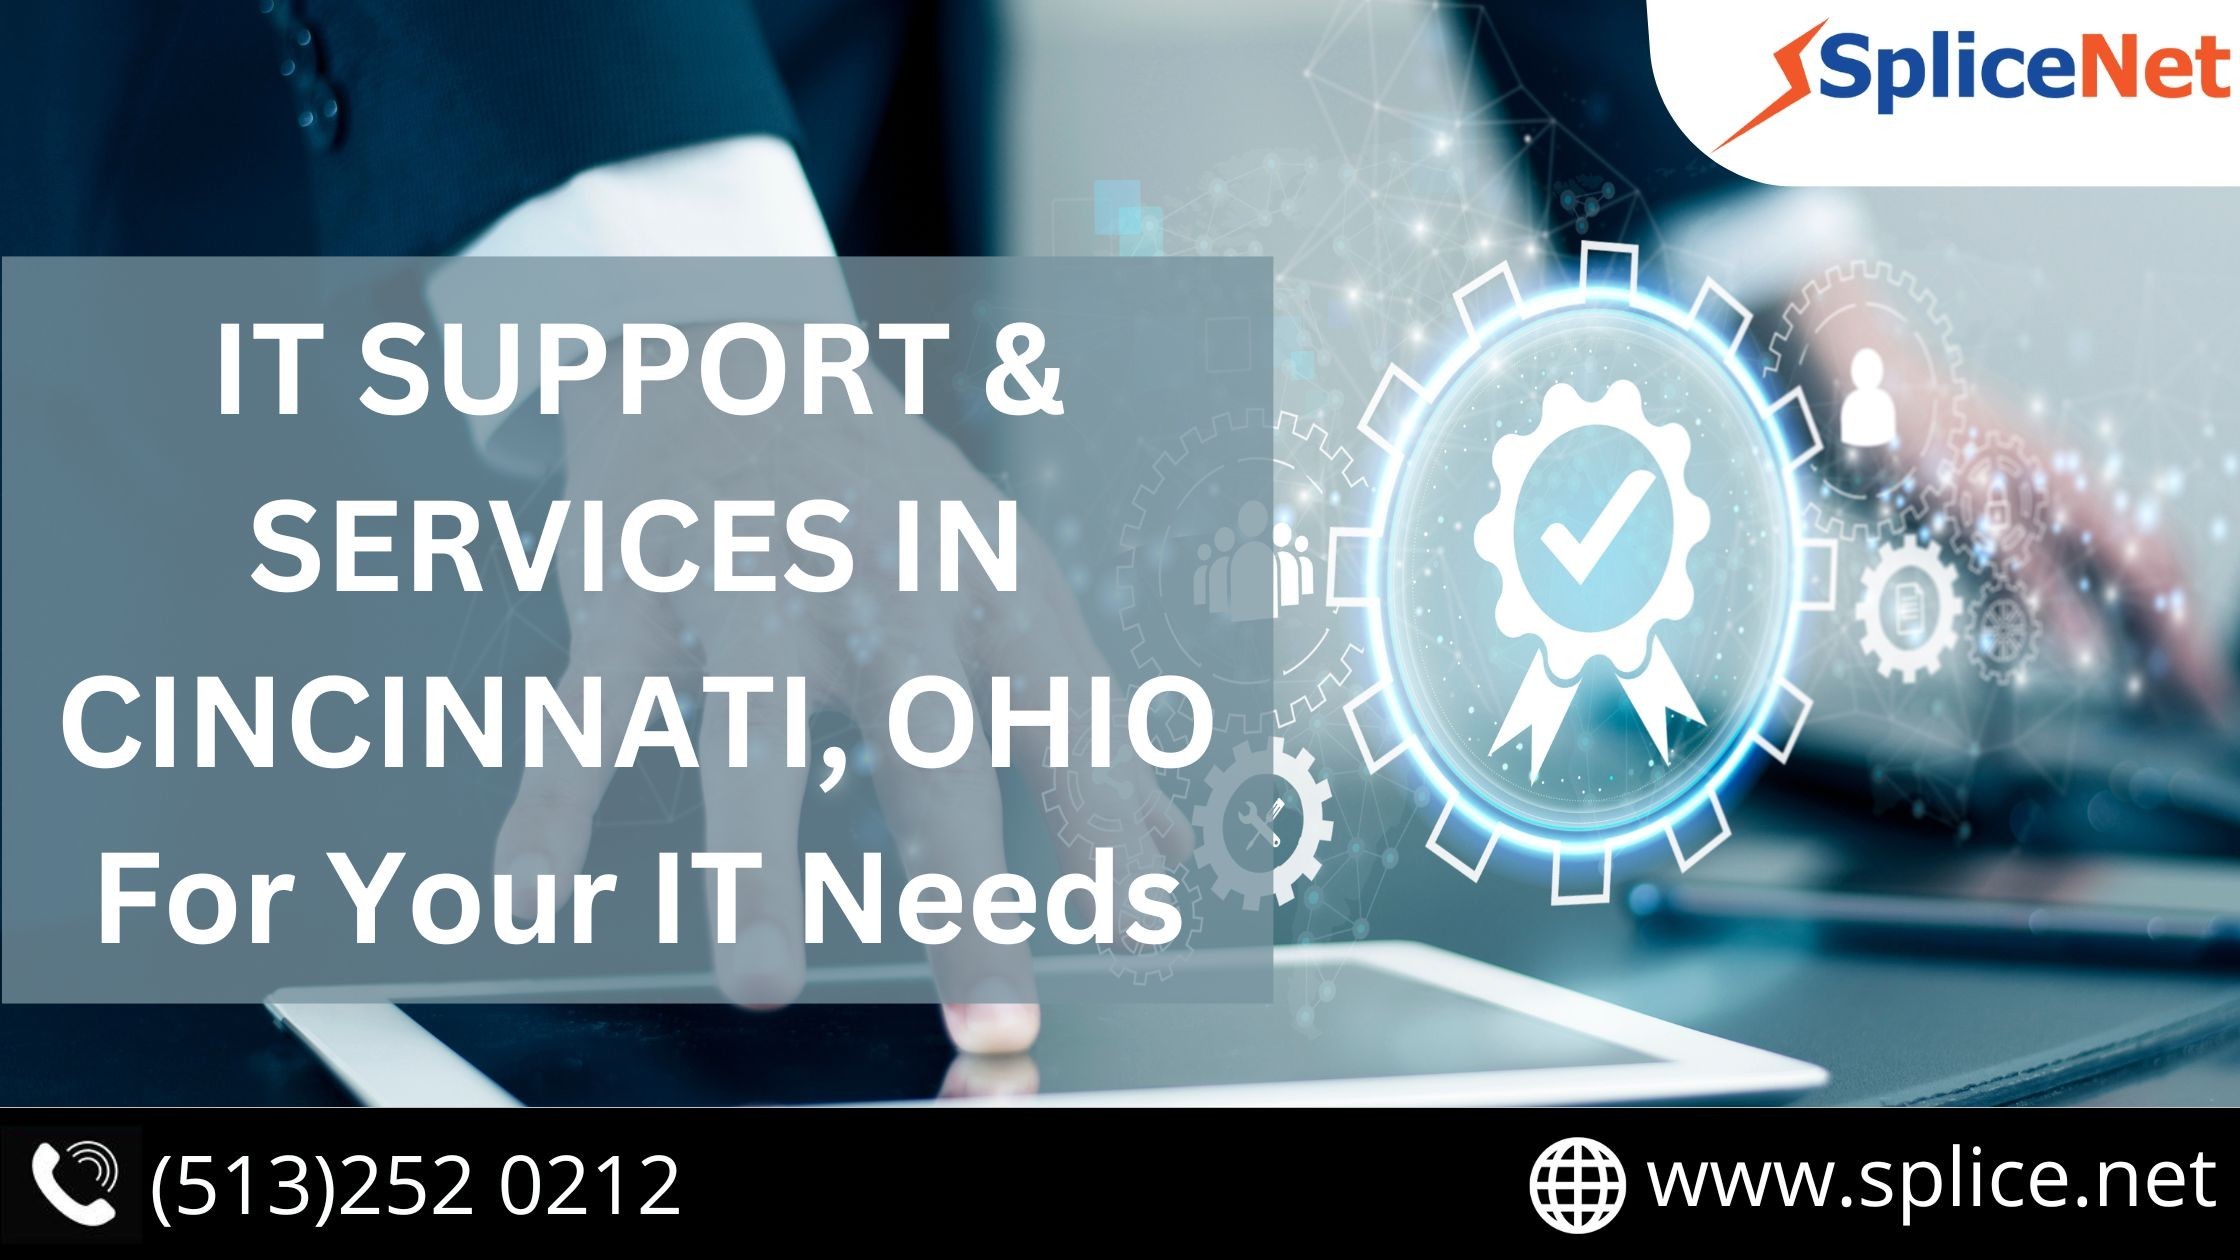 IT Support & Services in Cincinnati, Ohio, For Your IT Needs